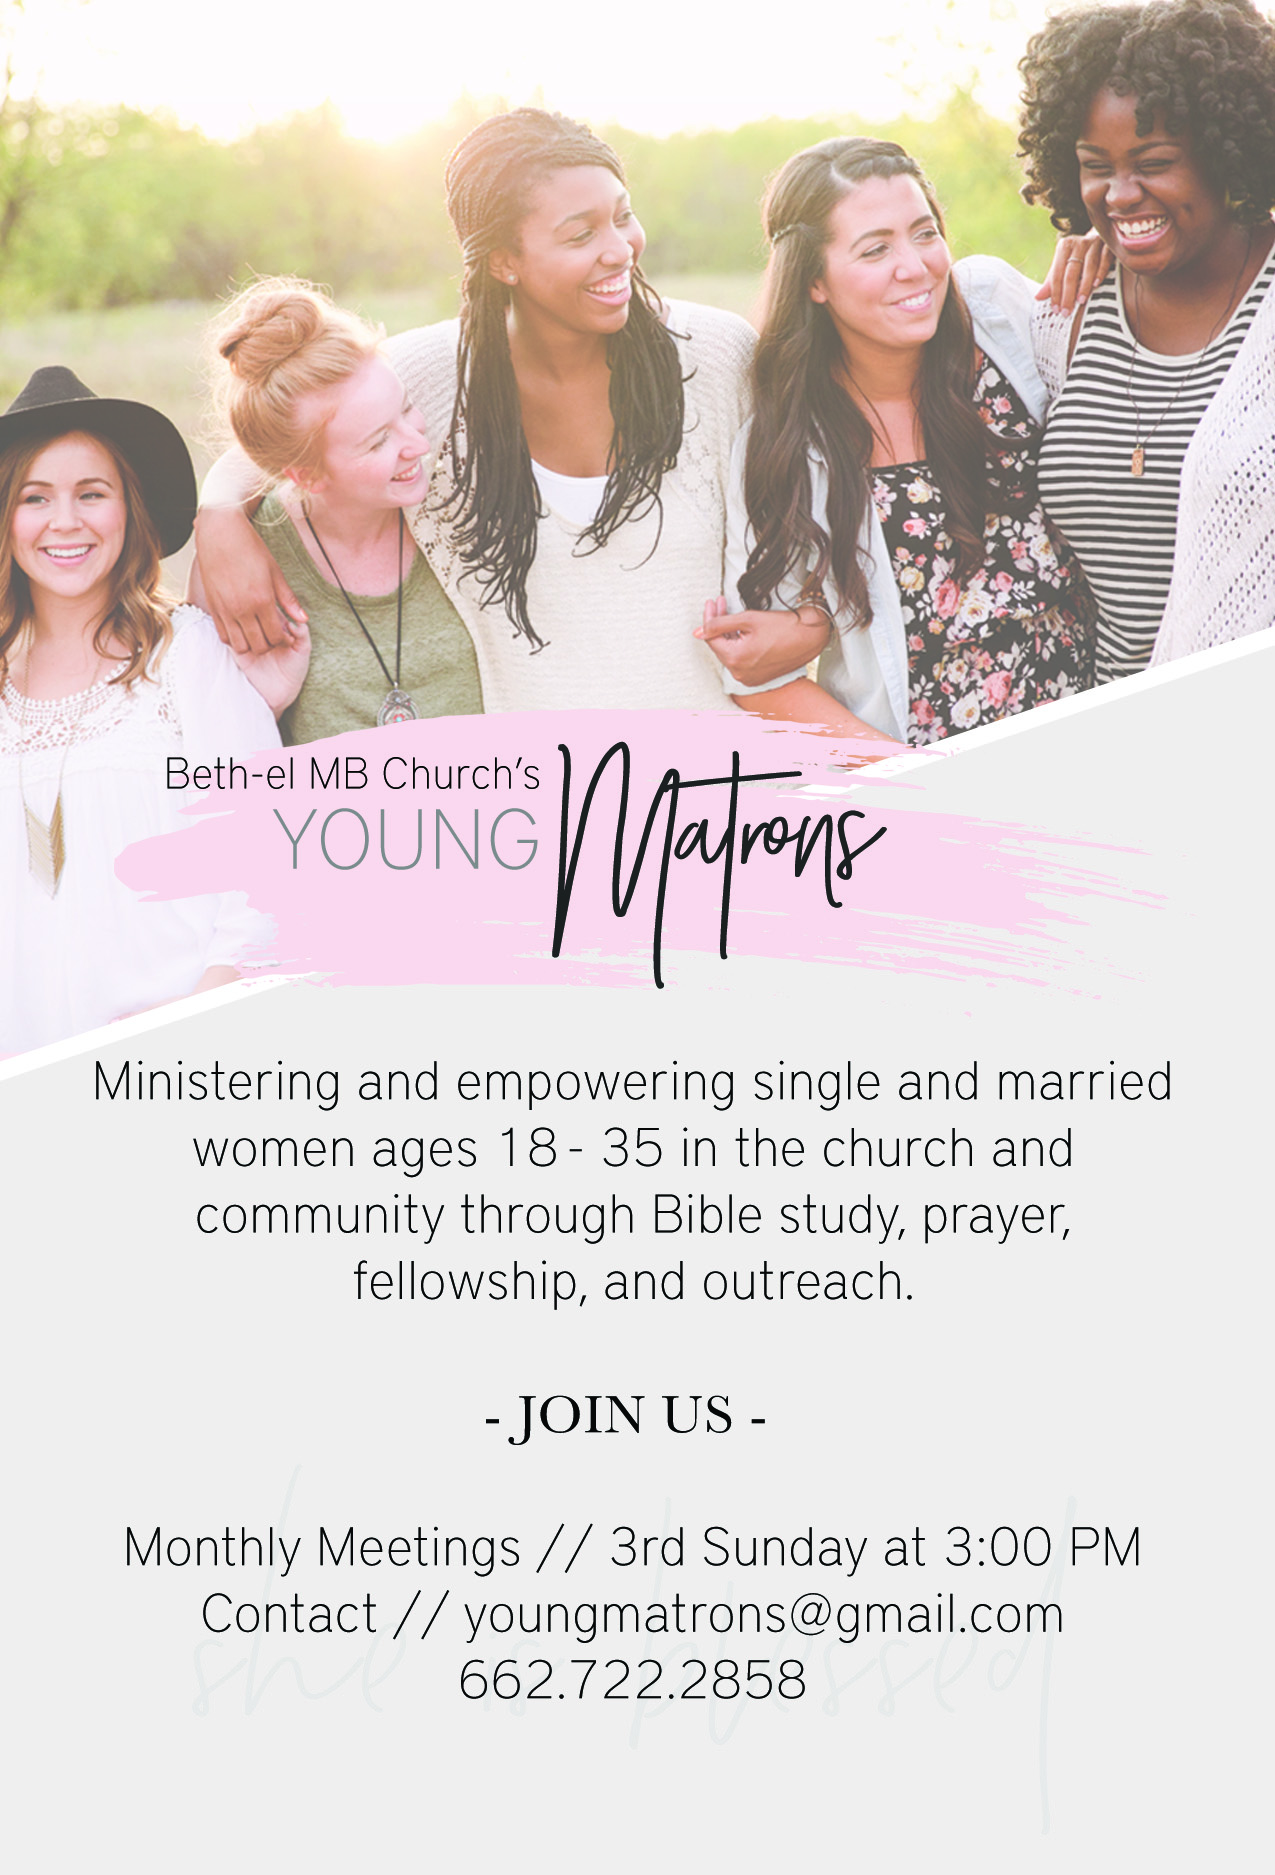 Young Matrons - Front Flyer.jpg